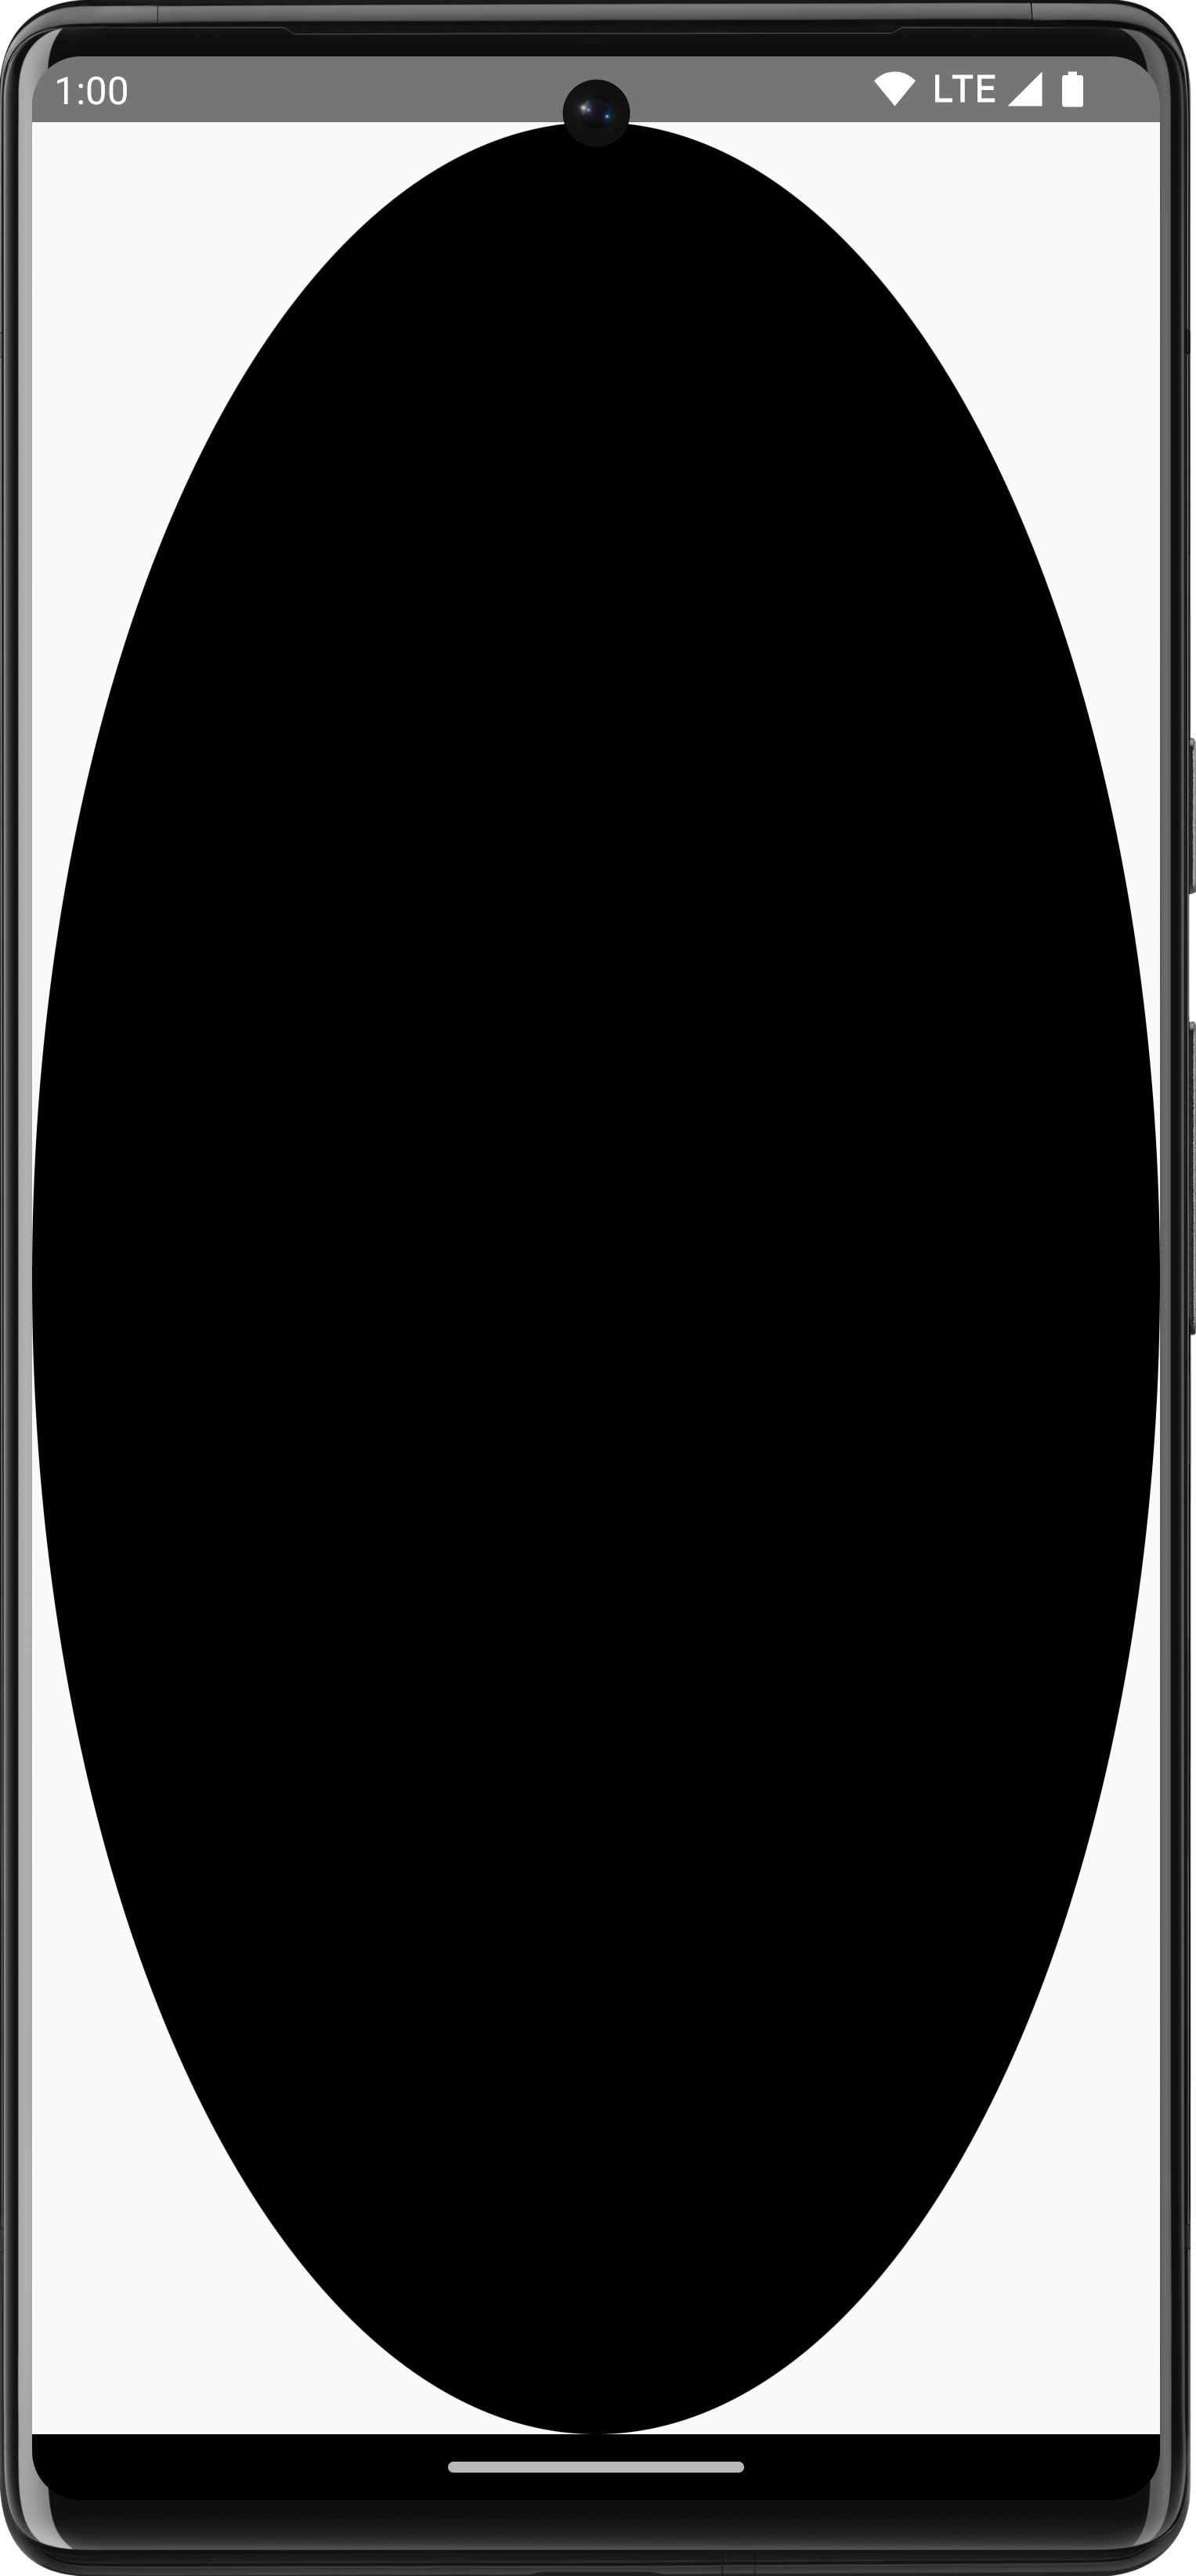 An oval black ShapeDrawable taking up full size